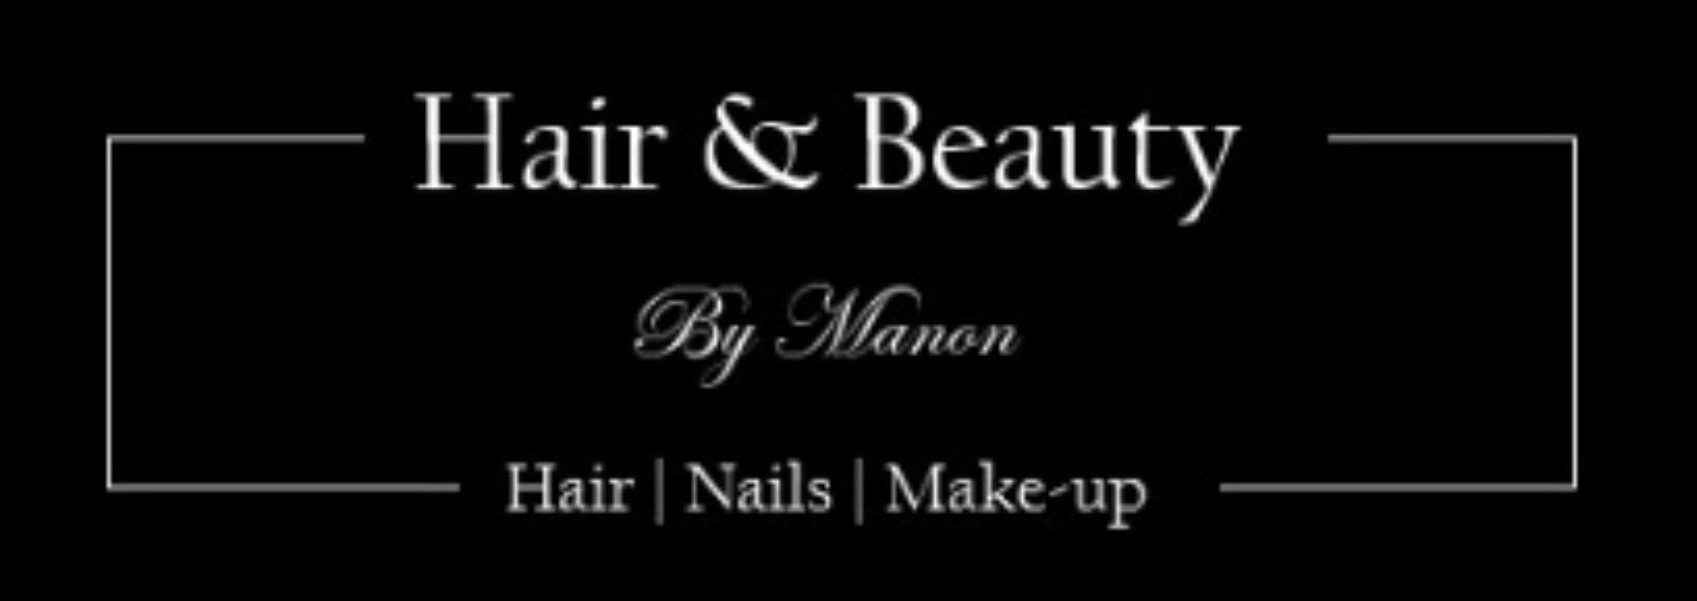 Hair & Beauty by Manon